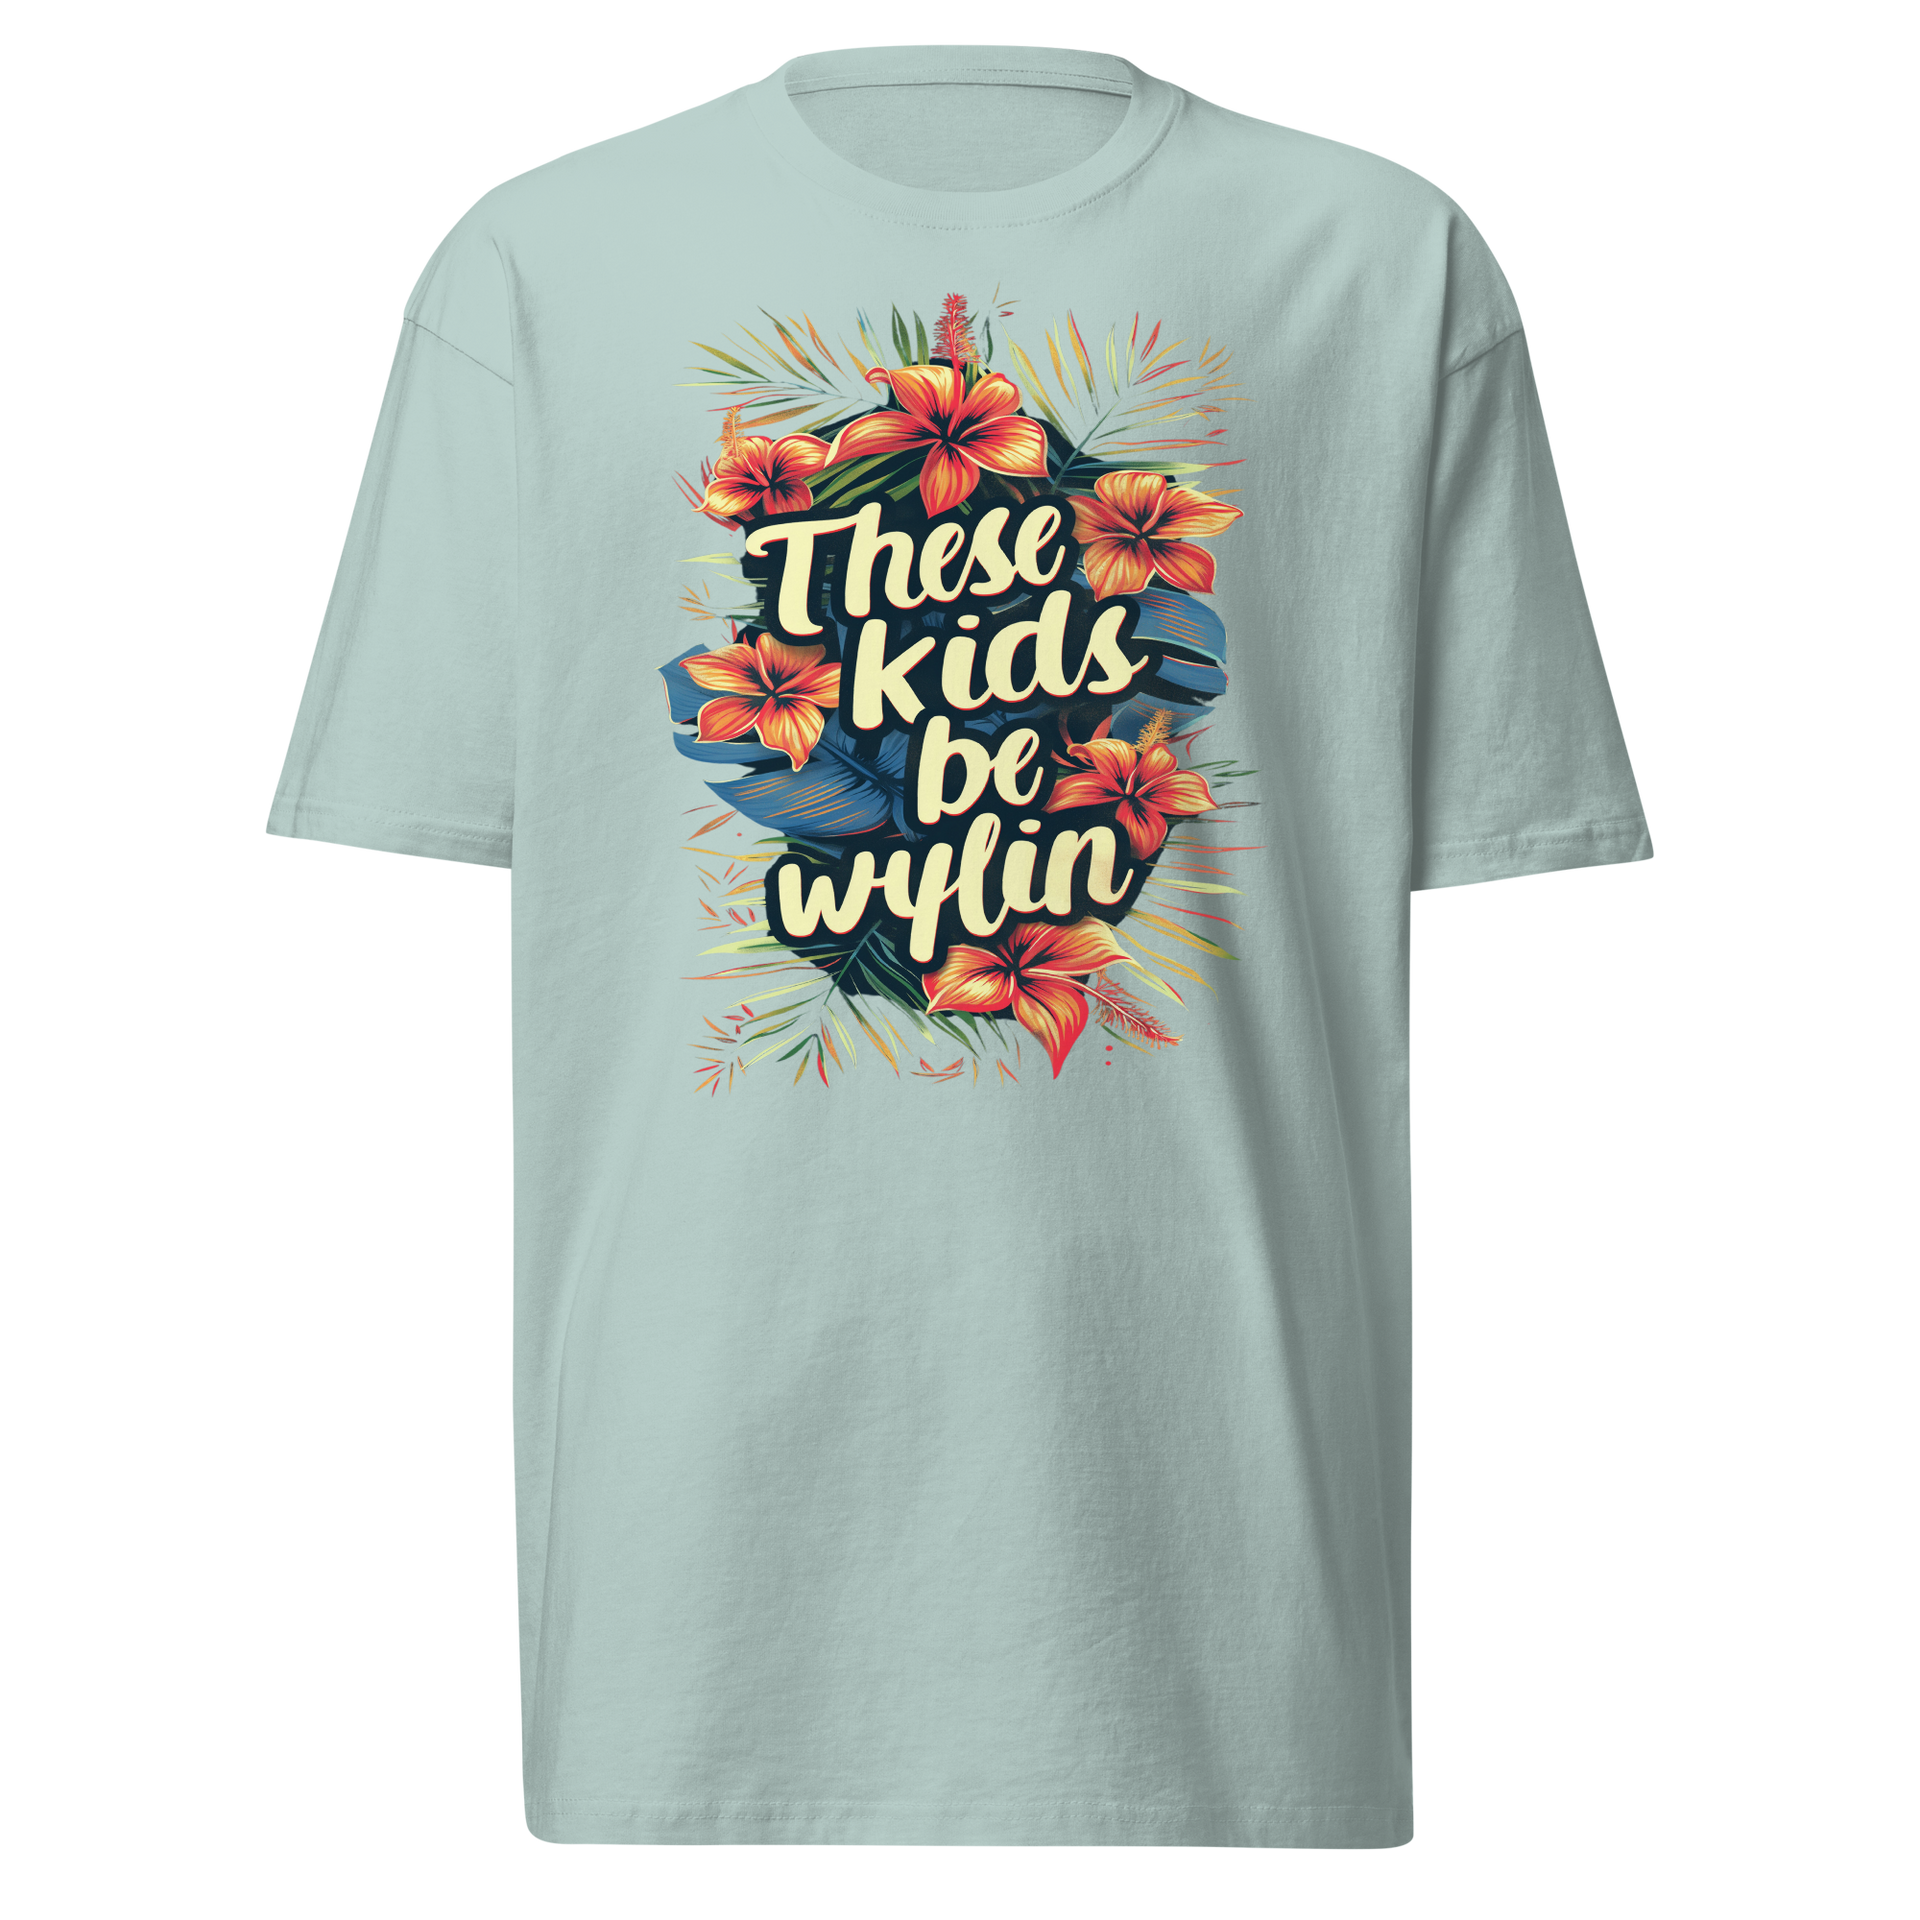 Blackstock | Limited Edition THESE KIDS BE WYLIN’  Premium Heavyweight tee